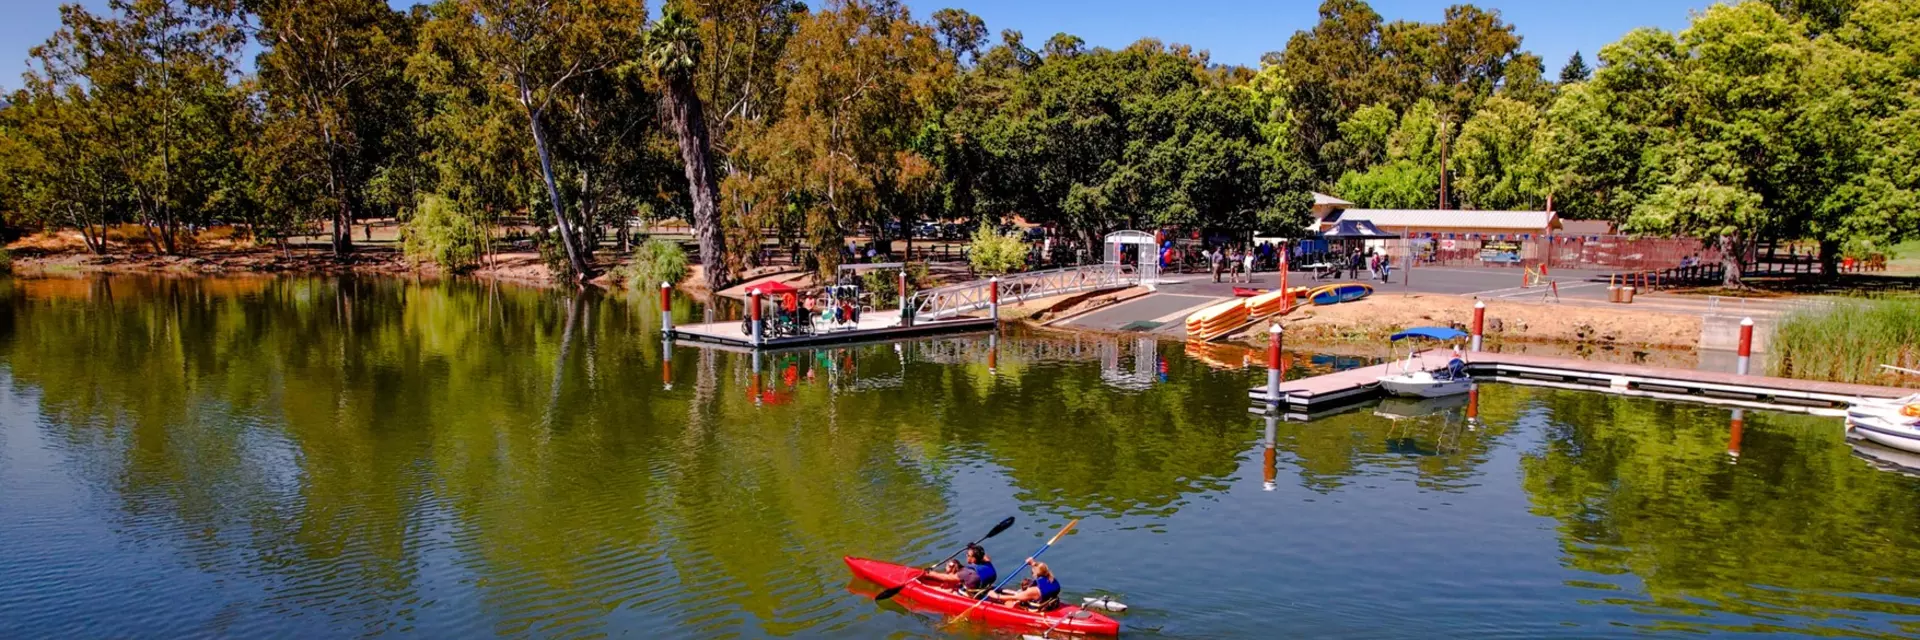 ADA compliant boat dock inaugurated for persons with disabilities at Vasona Lake County Park